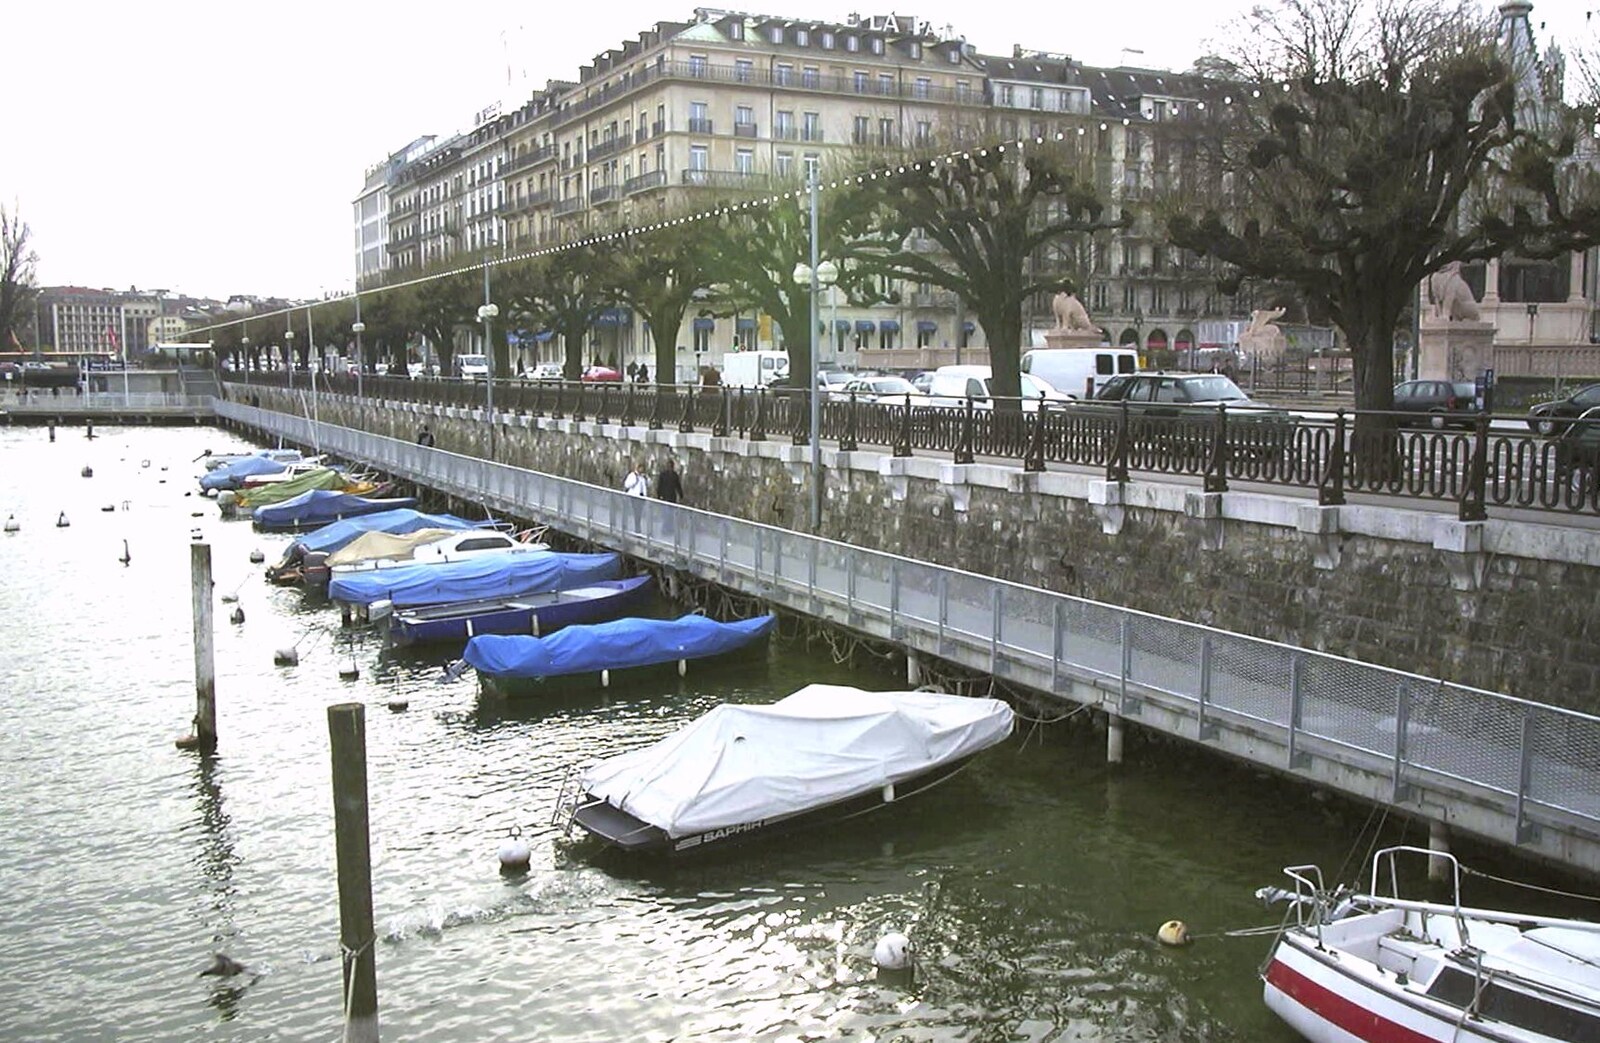 Boats by the lake shore from Nosher in Geneva, Switzerland - 17th March 2002